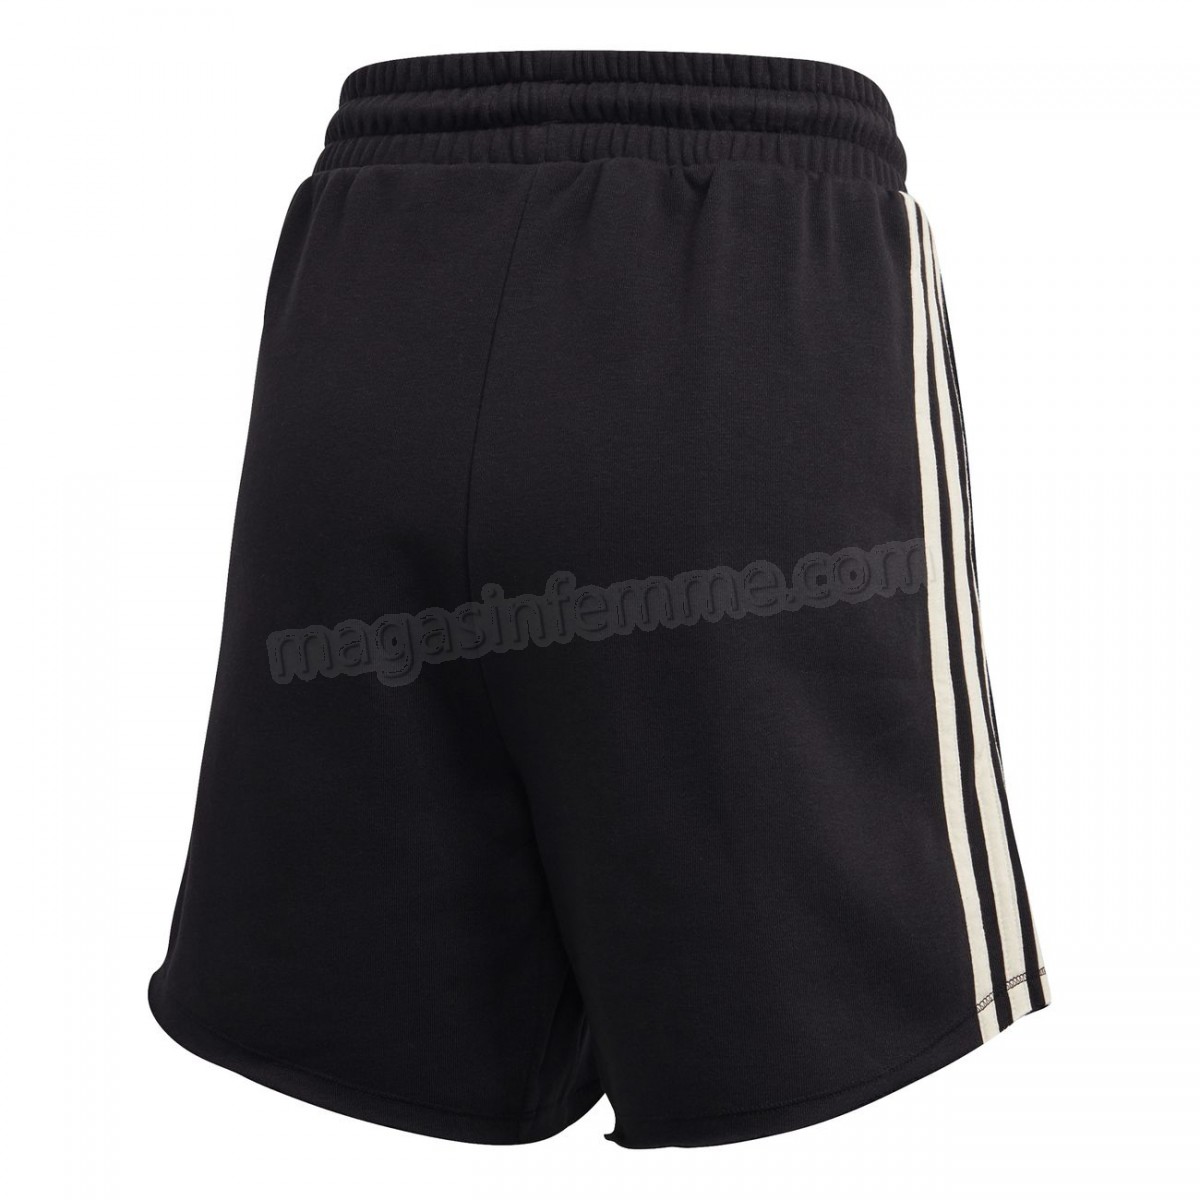 Adidas-Fitness femme ADIDAS Short femme adidas Must Haves Recycled Cotton en solde - -5